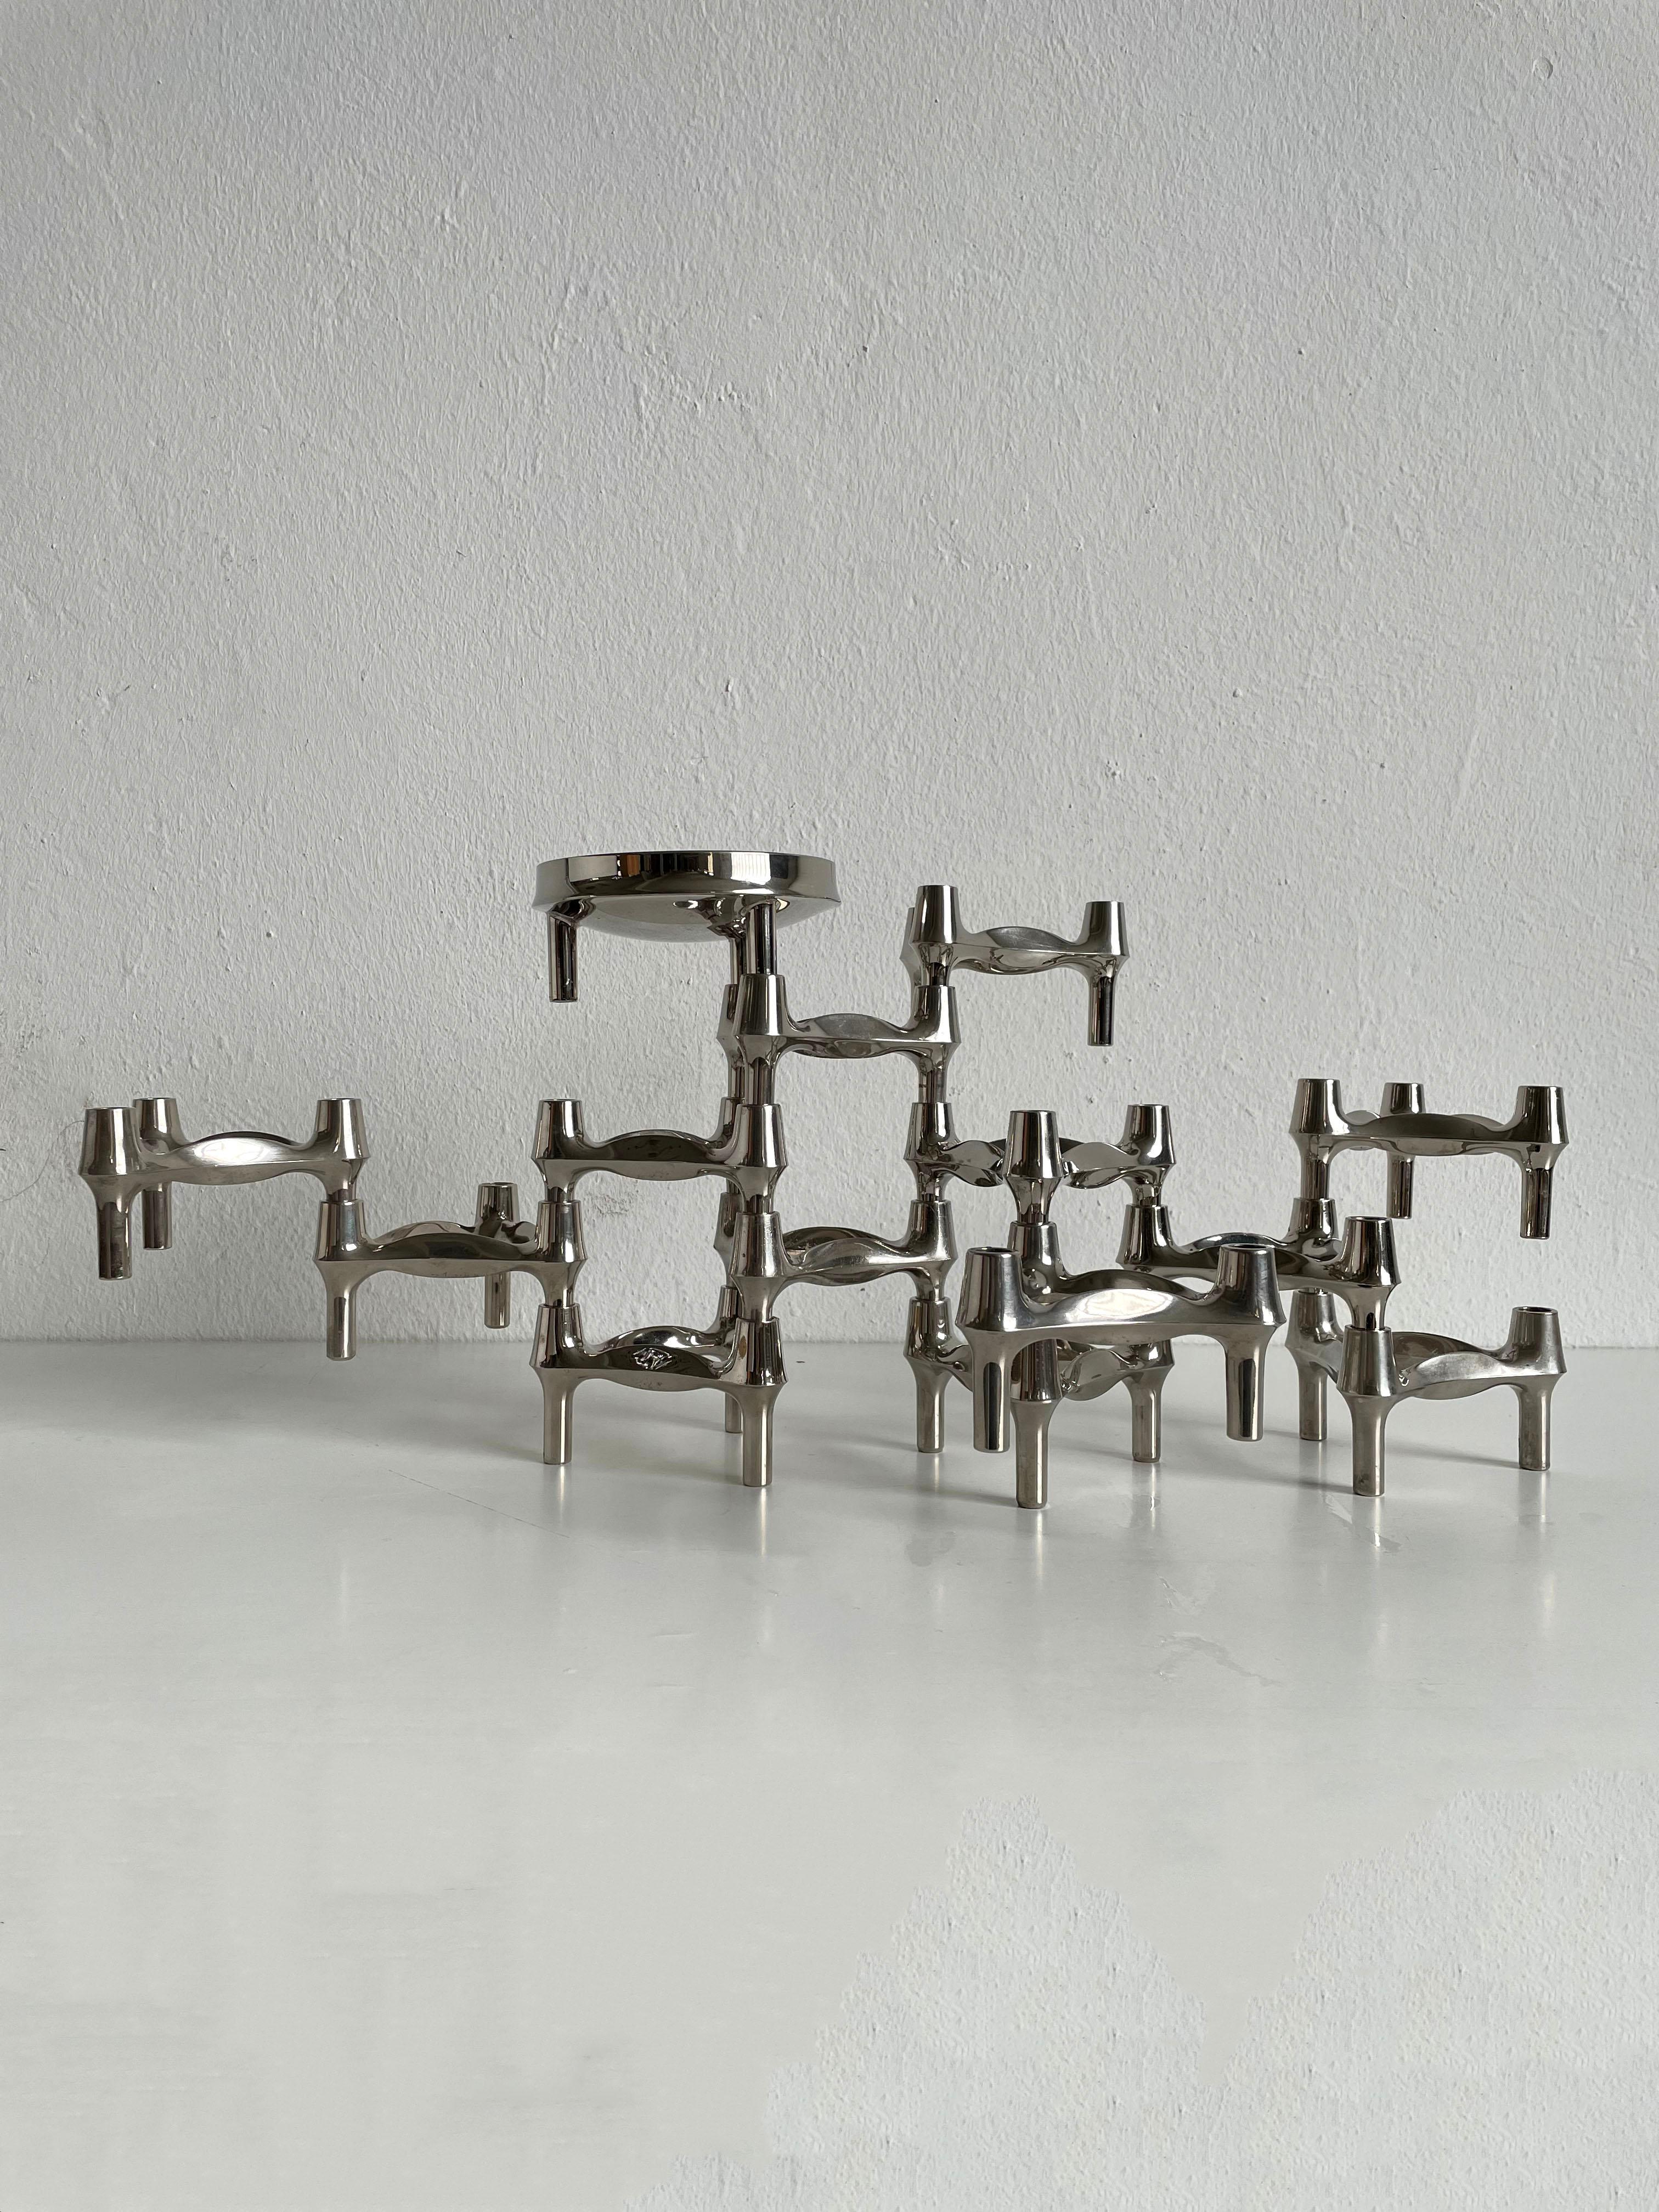 Modular Candle Holder by Caesare Stoffi for BMF Nagel, 14 Pcs, Germany, 1970s 1